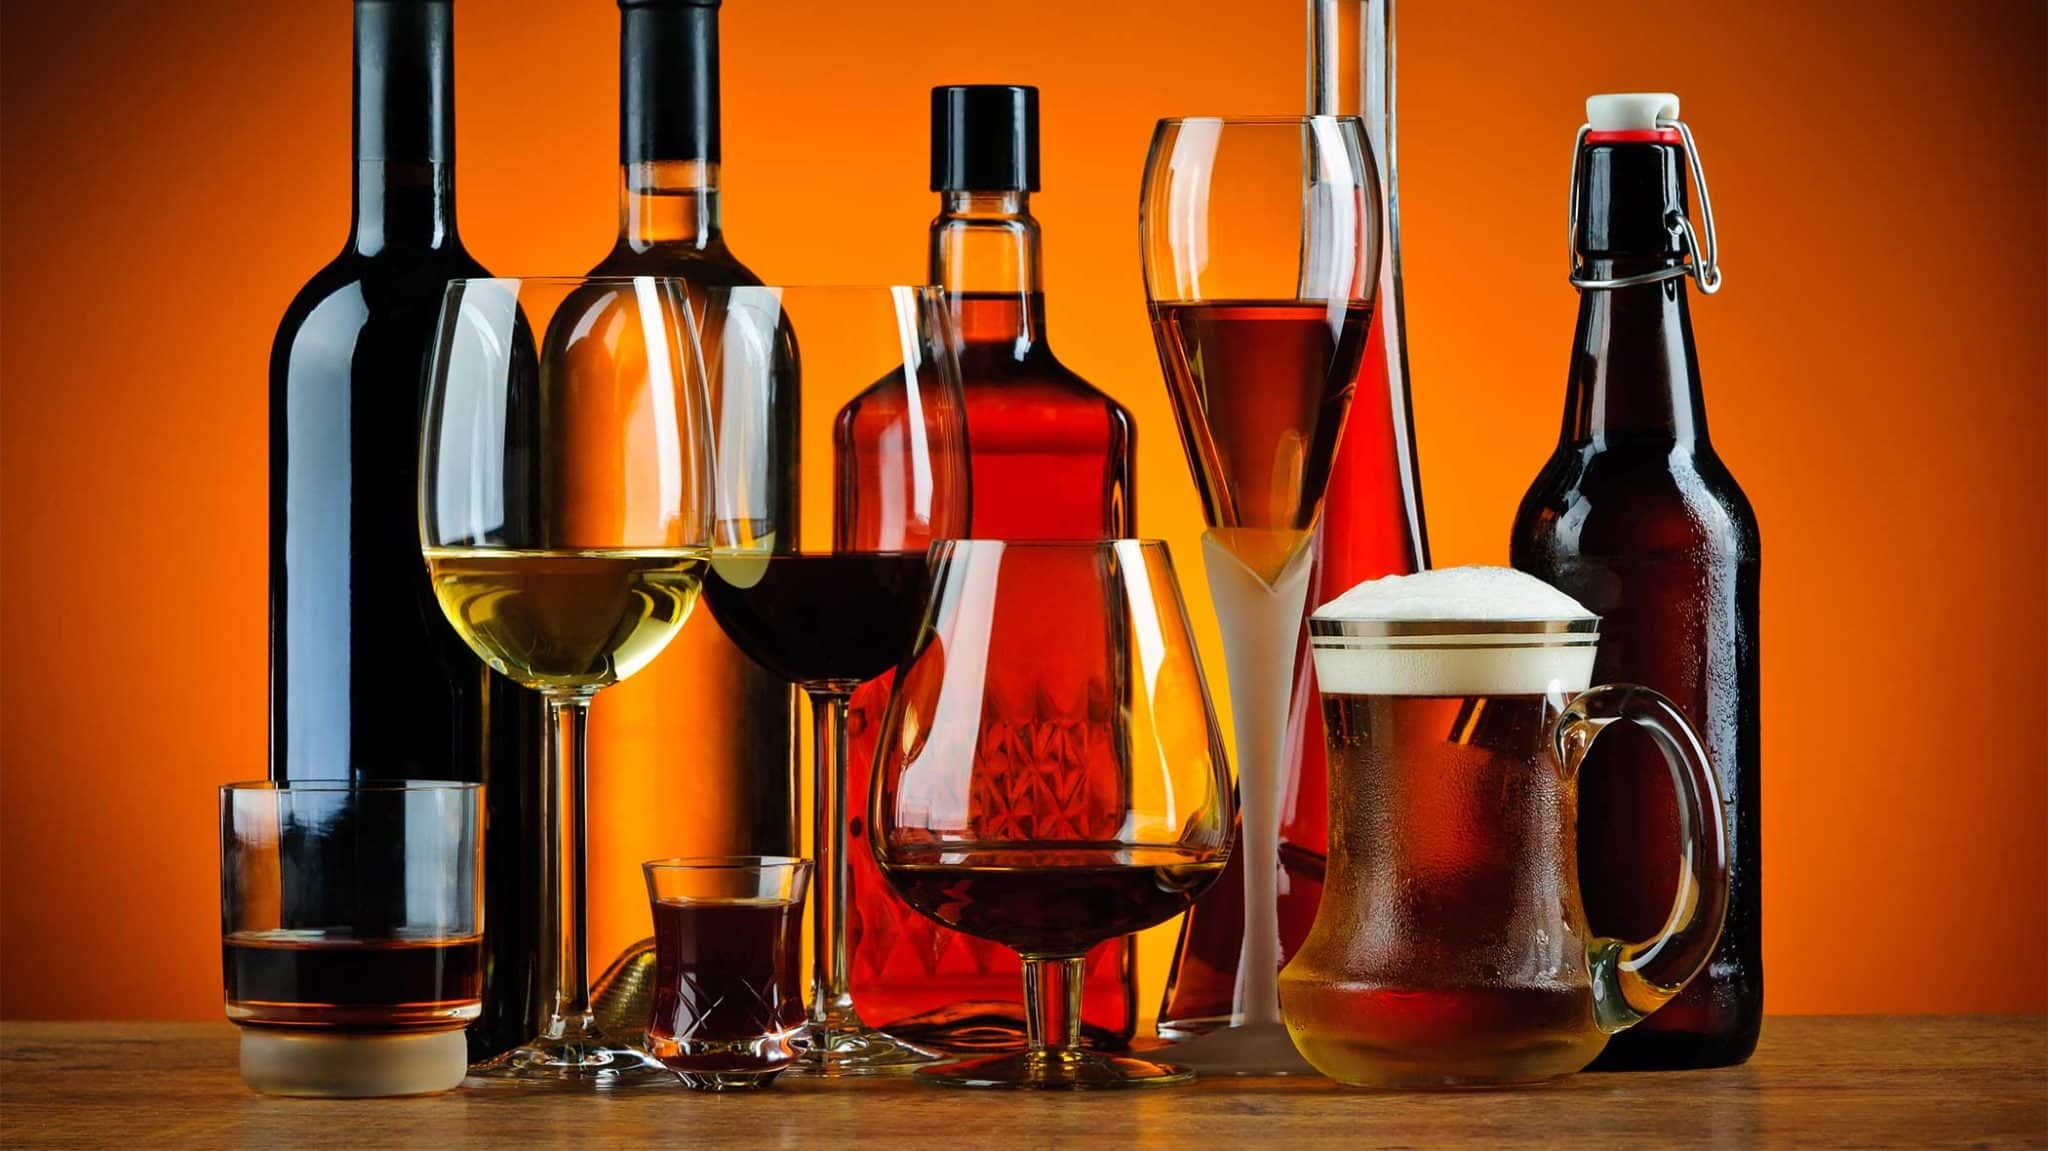 India Alcoholic Beverages Market is estimated to reach USD 76.5 billion by 2032 with a CAGR of 7.74%.